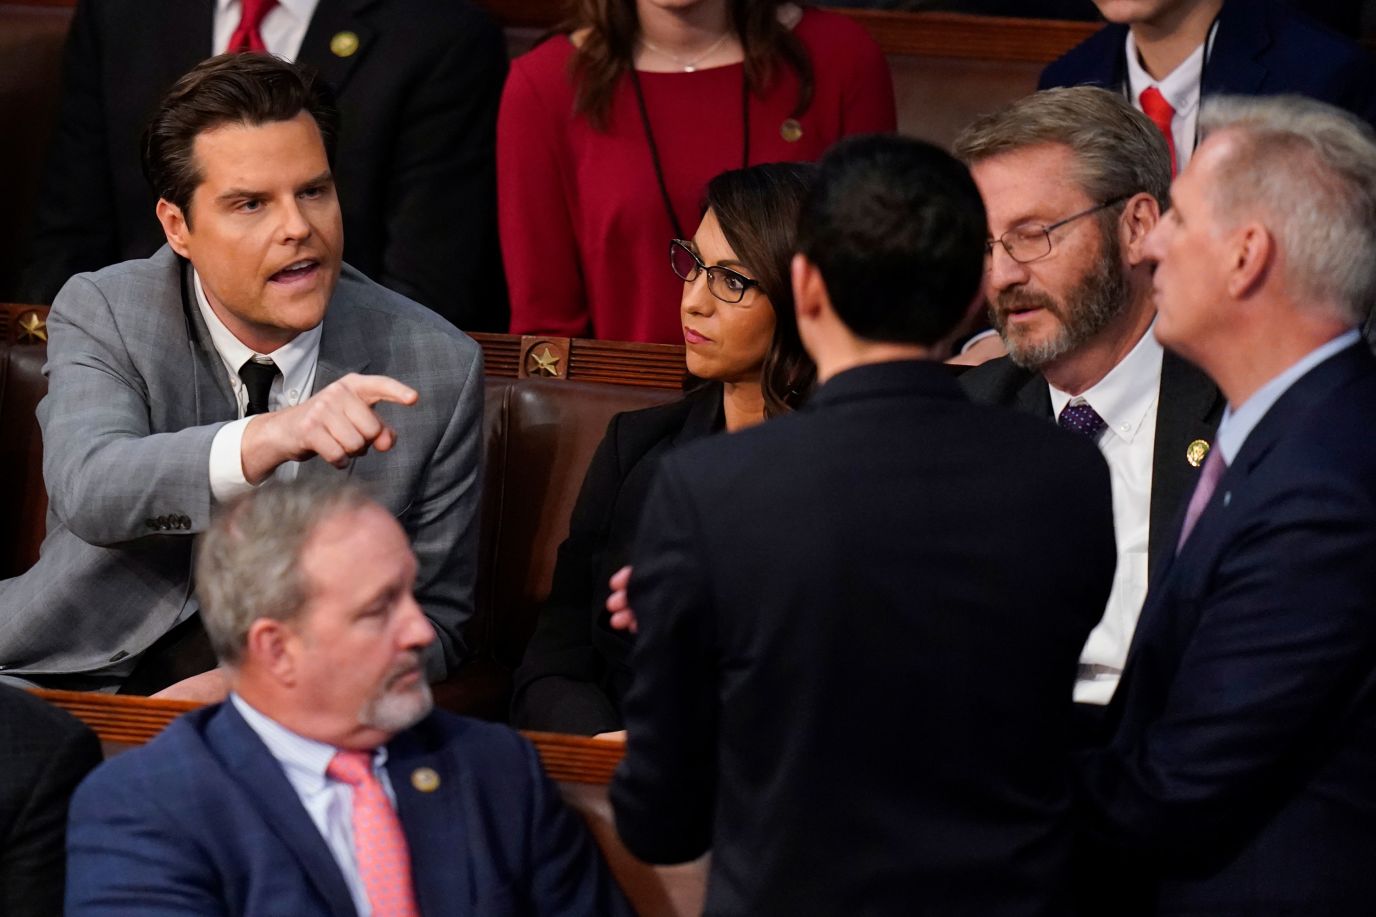 U.S. Rep. Matt Gates, a Republican from Florida, confronts Kevin McCarthy about his "current" The 14th round of voting takes place on Friday. 